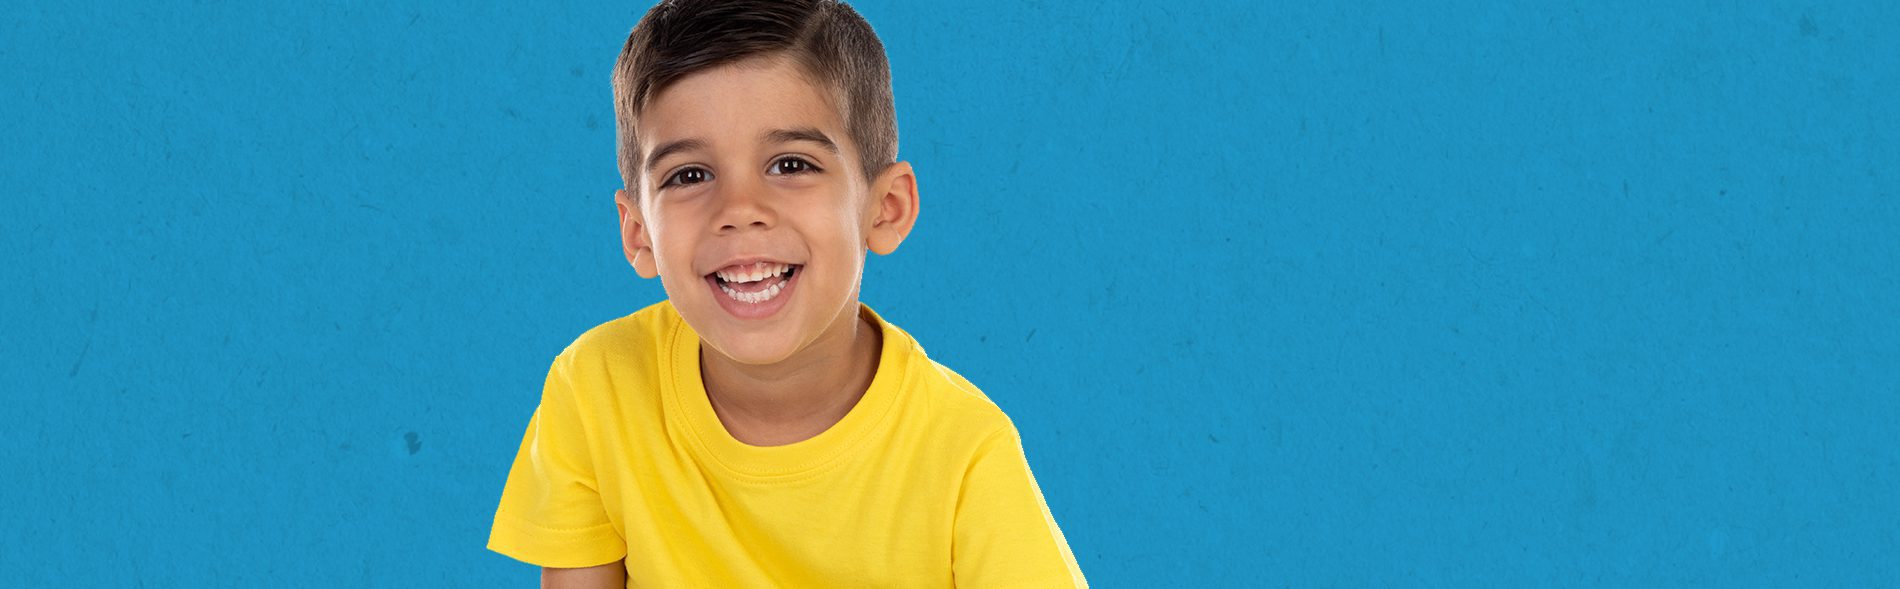 A boy smiling at the camera wearing a yellow tshirt in front of a solid blue background.